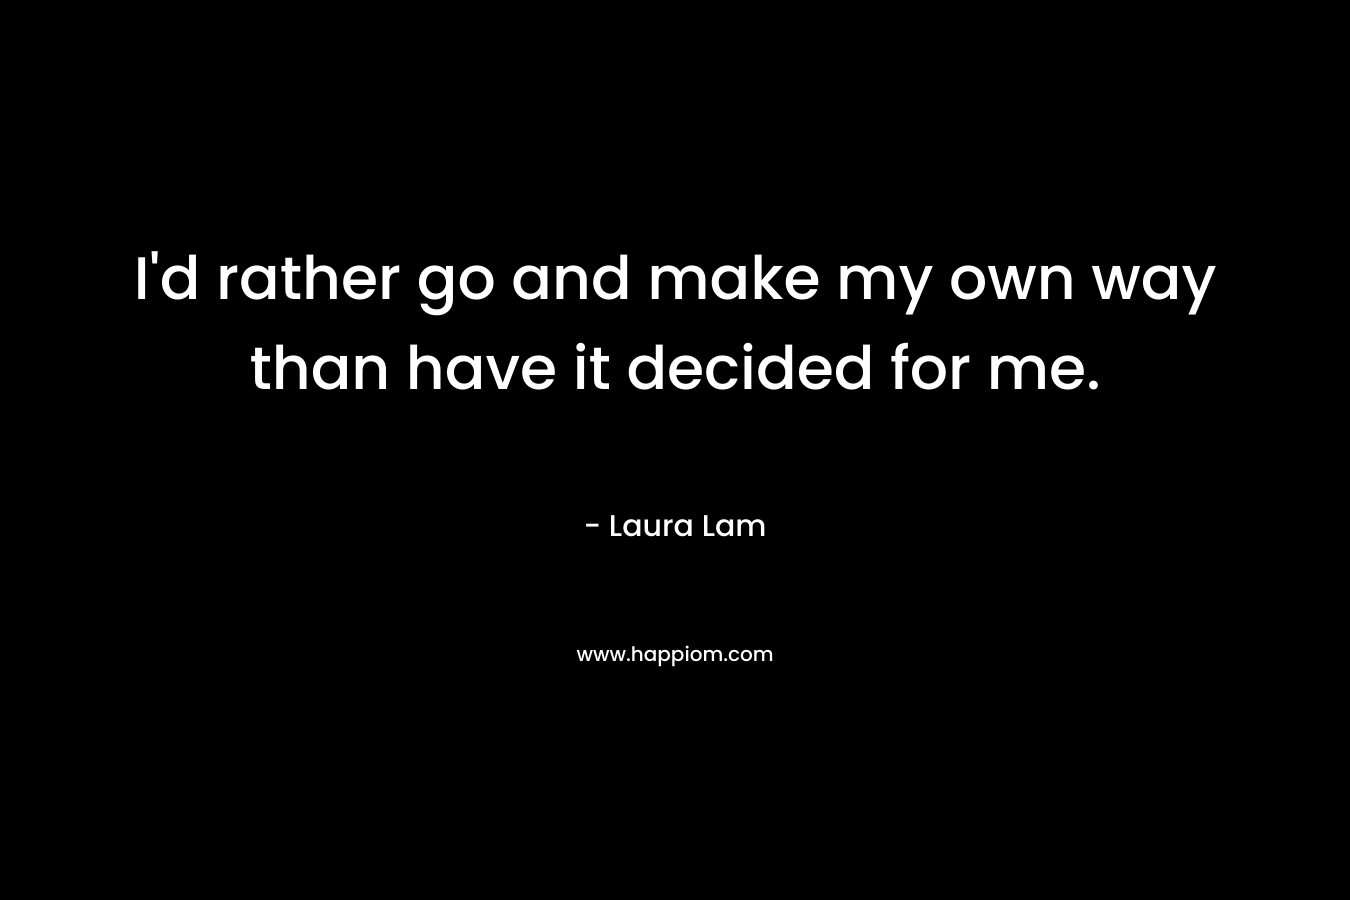 I'd rather go and make my own way than have it decided for me.